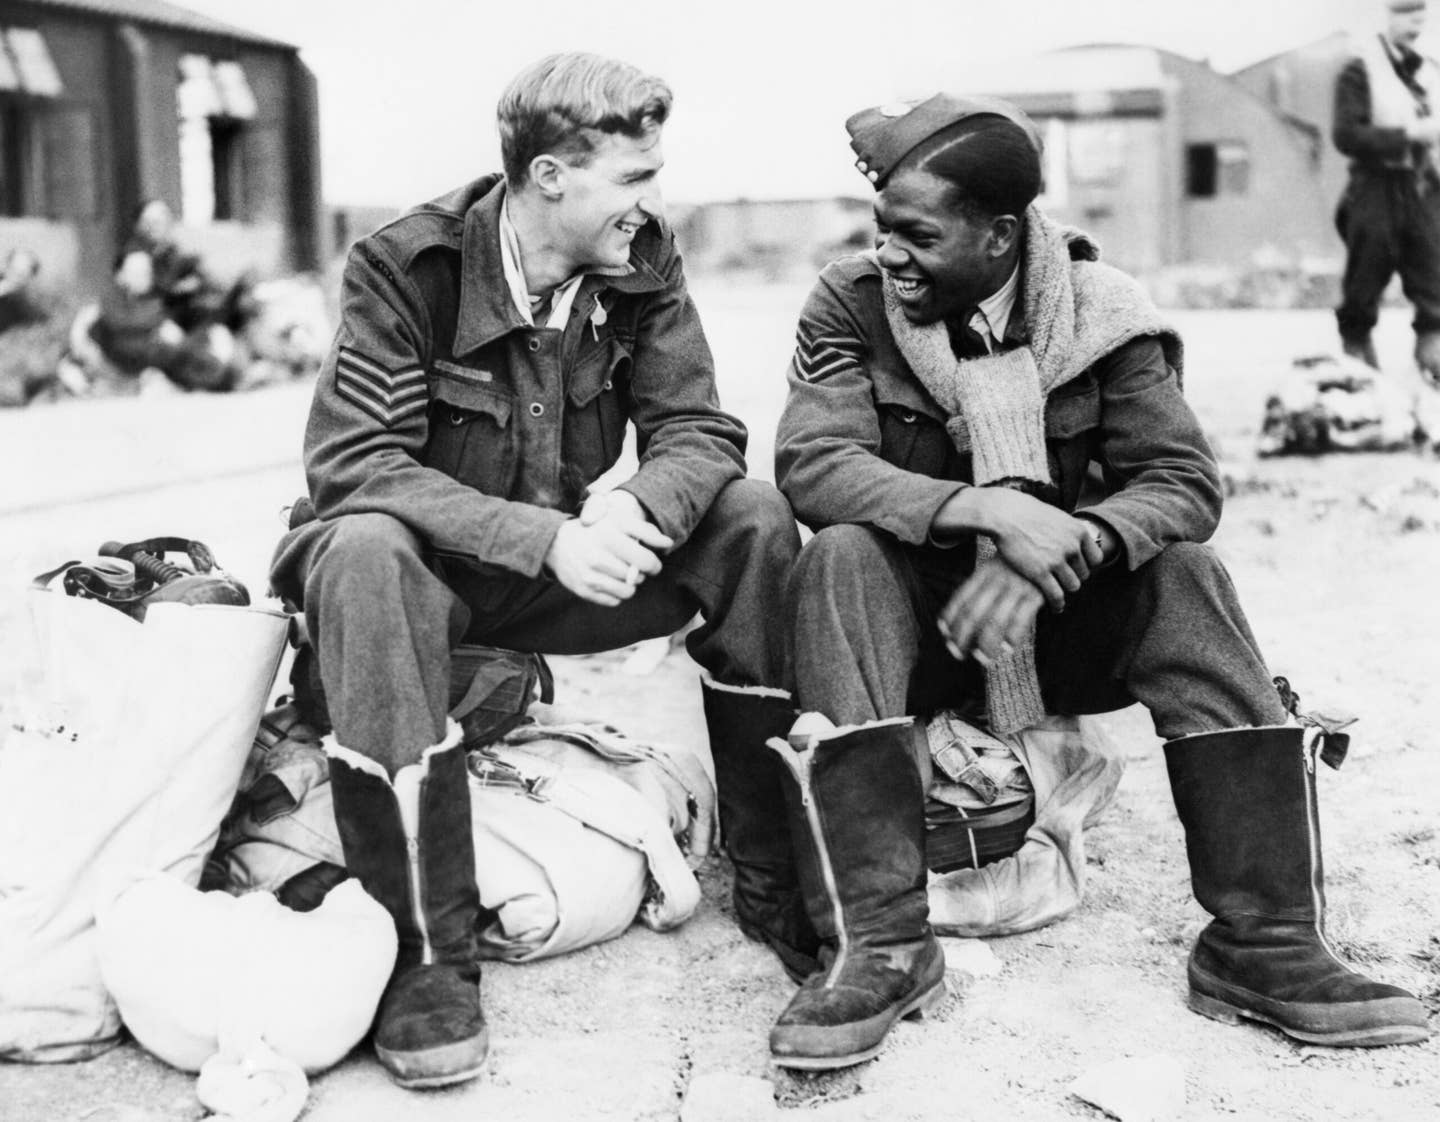 Two RAF Bomber Command aircrew, Sergeant J. Dickinson from Canada and Sergeant F. Gilkes from Trinidad, waiting to board their aircraft for a raid on Hamburg in 1943. <em>Photo by Press Agency photographer/Imperial War Museums via Getty Images</em>